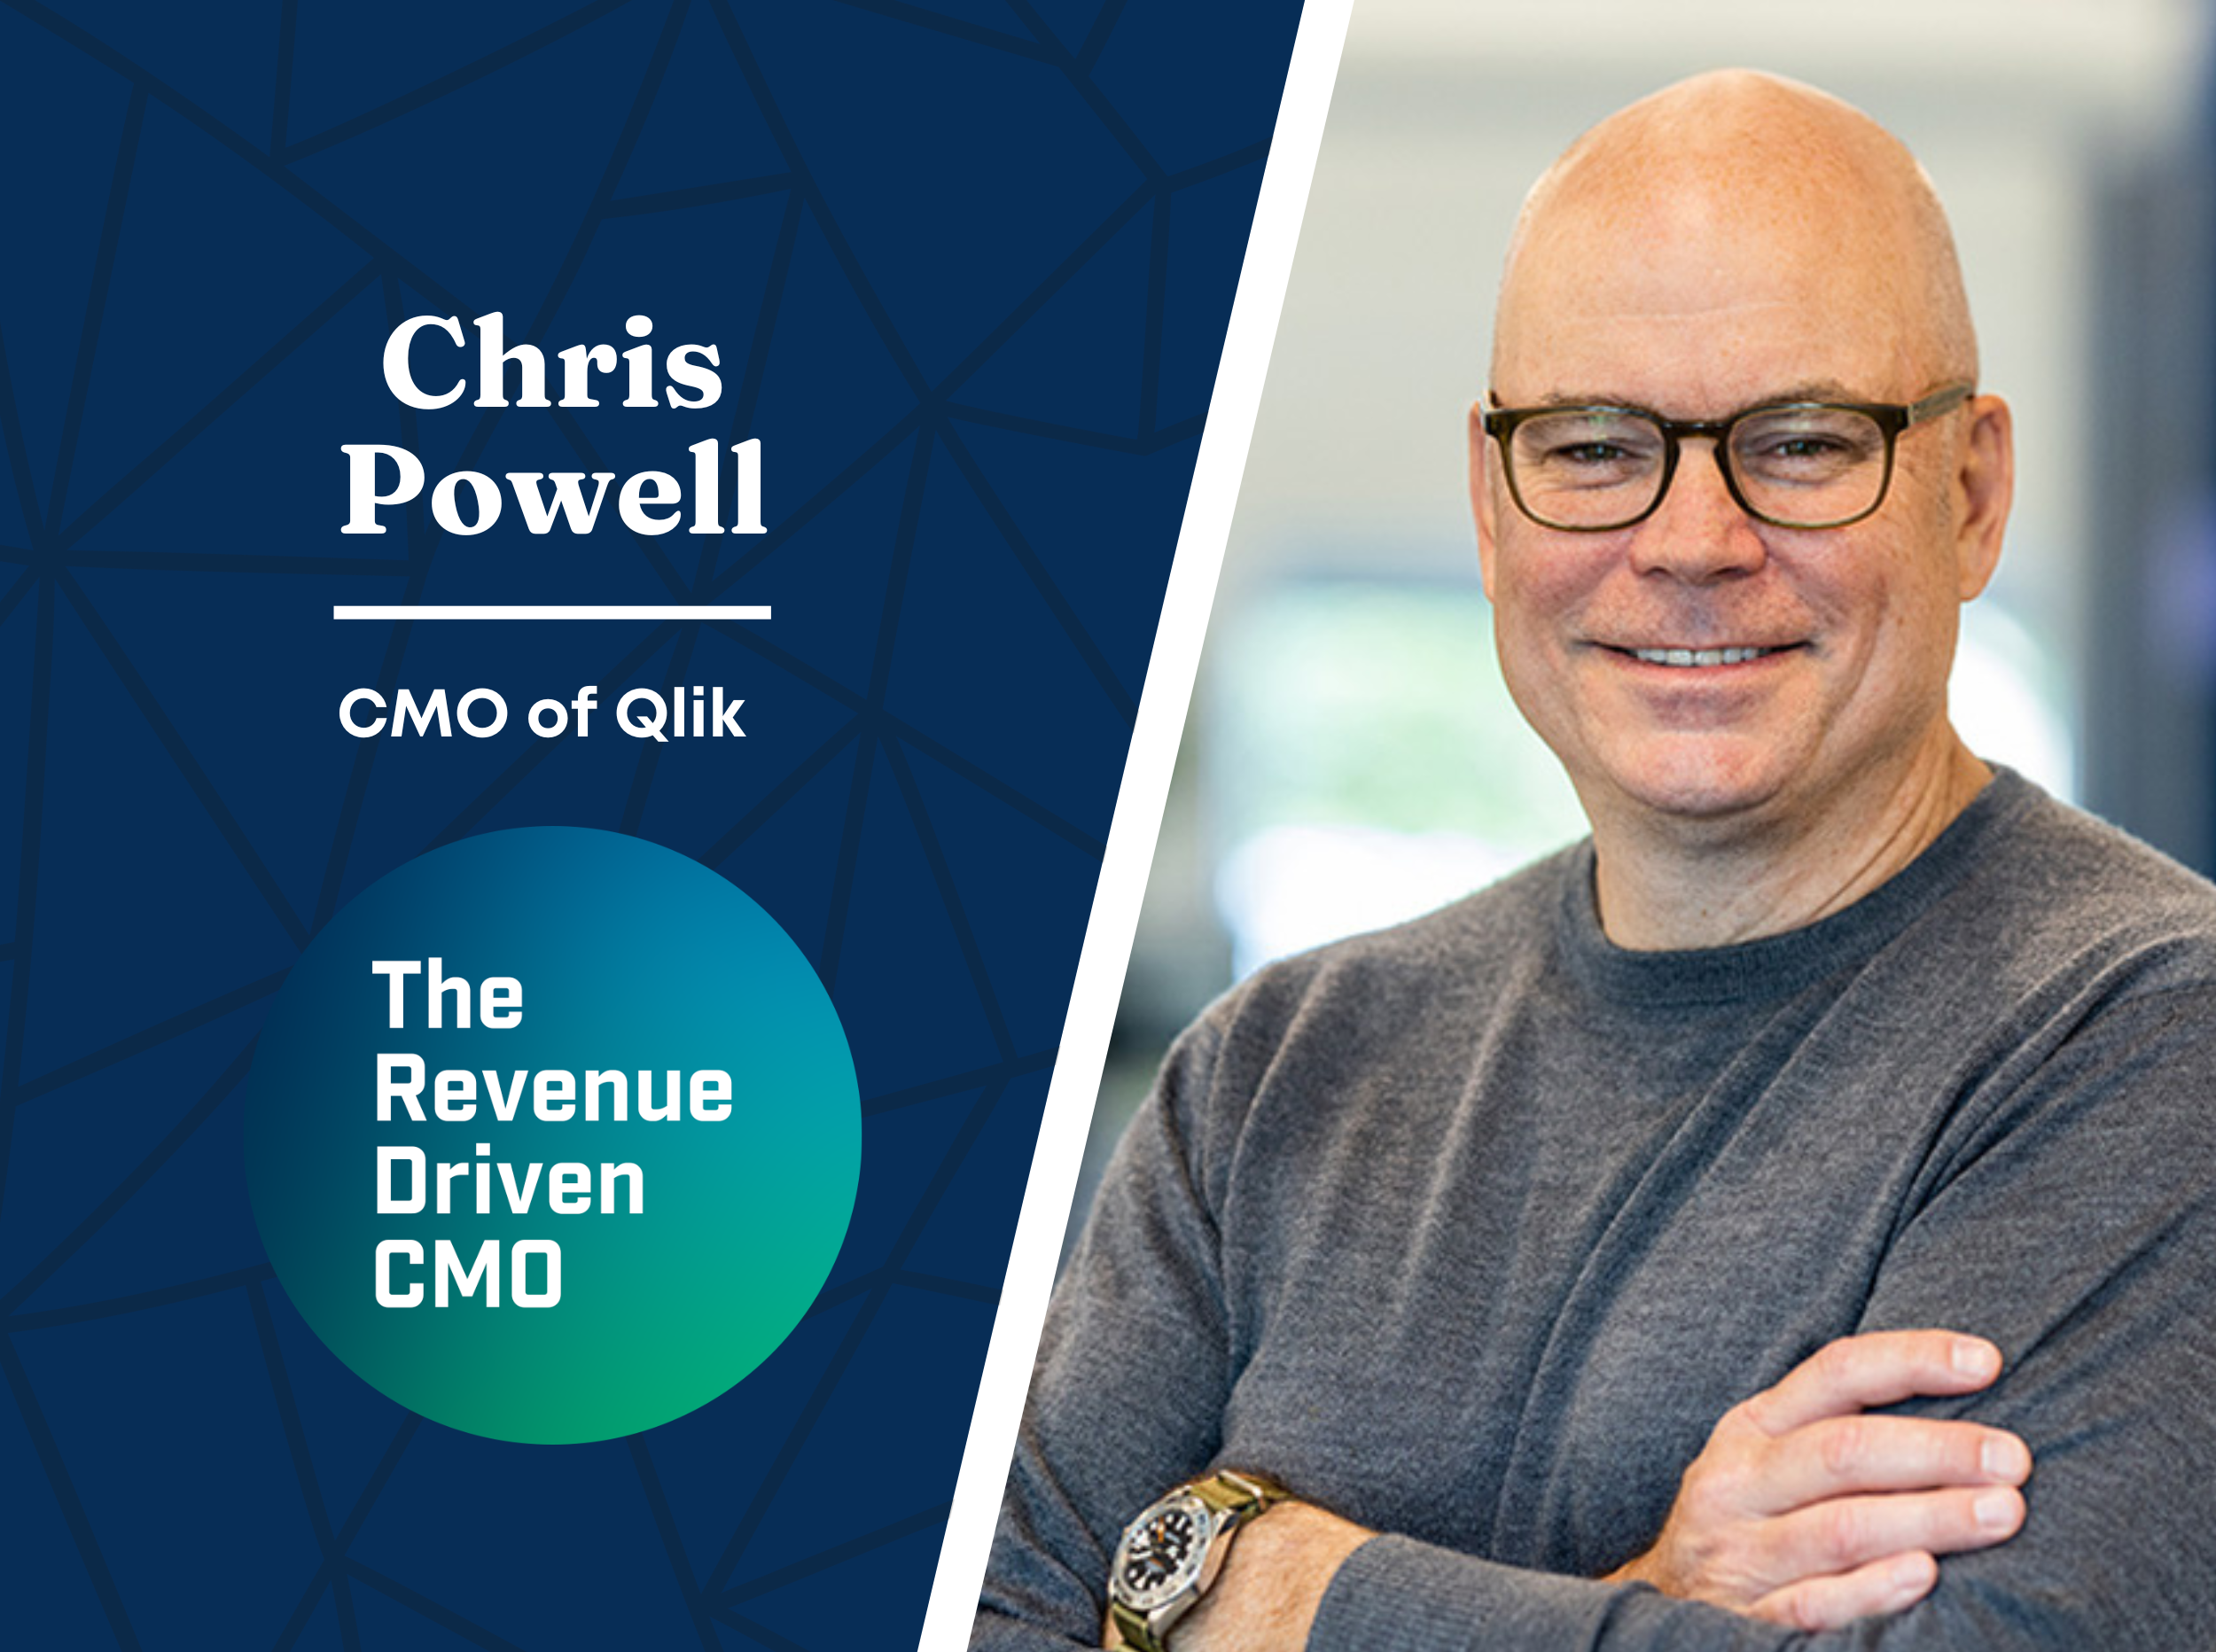 Thinking about the big picture as CMO with Chris Powell